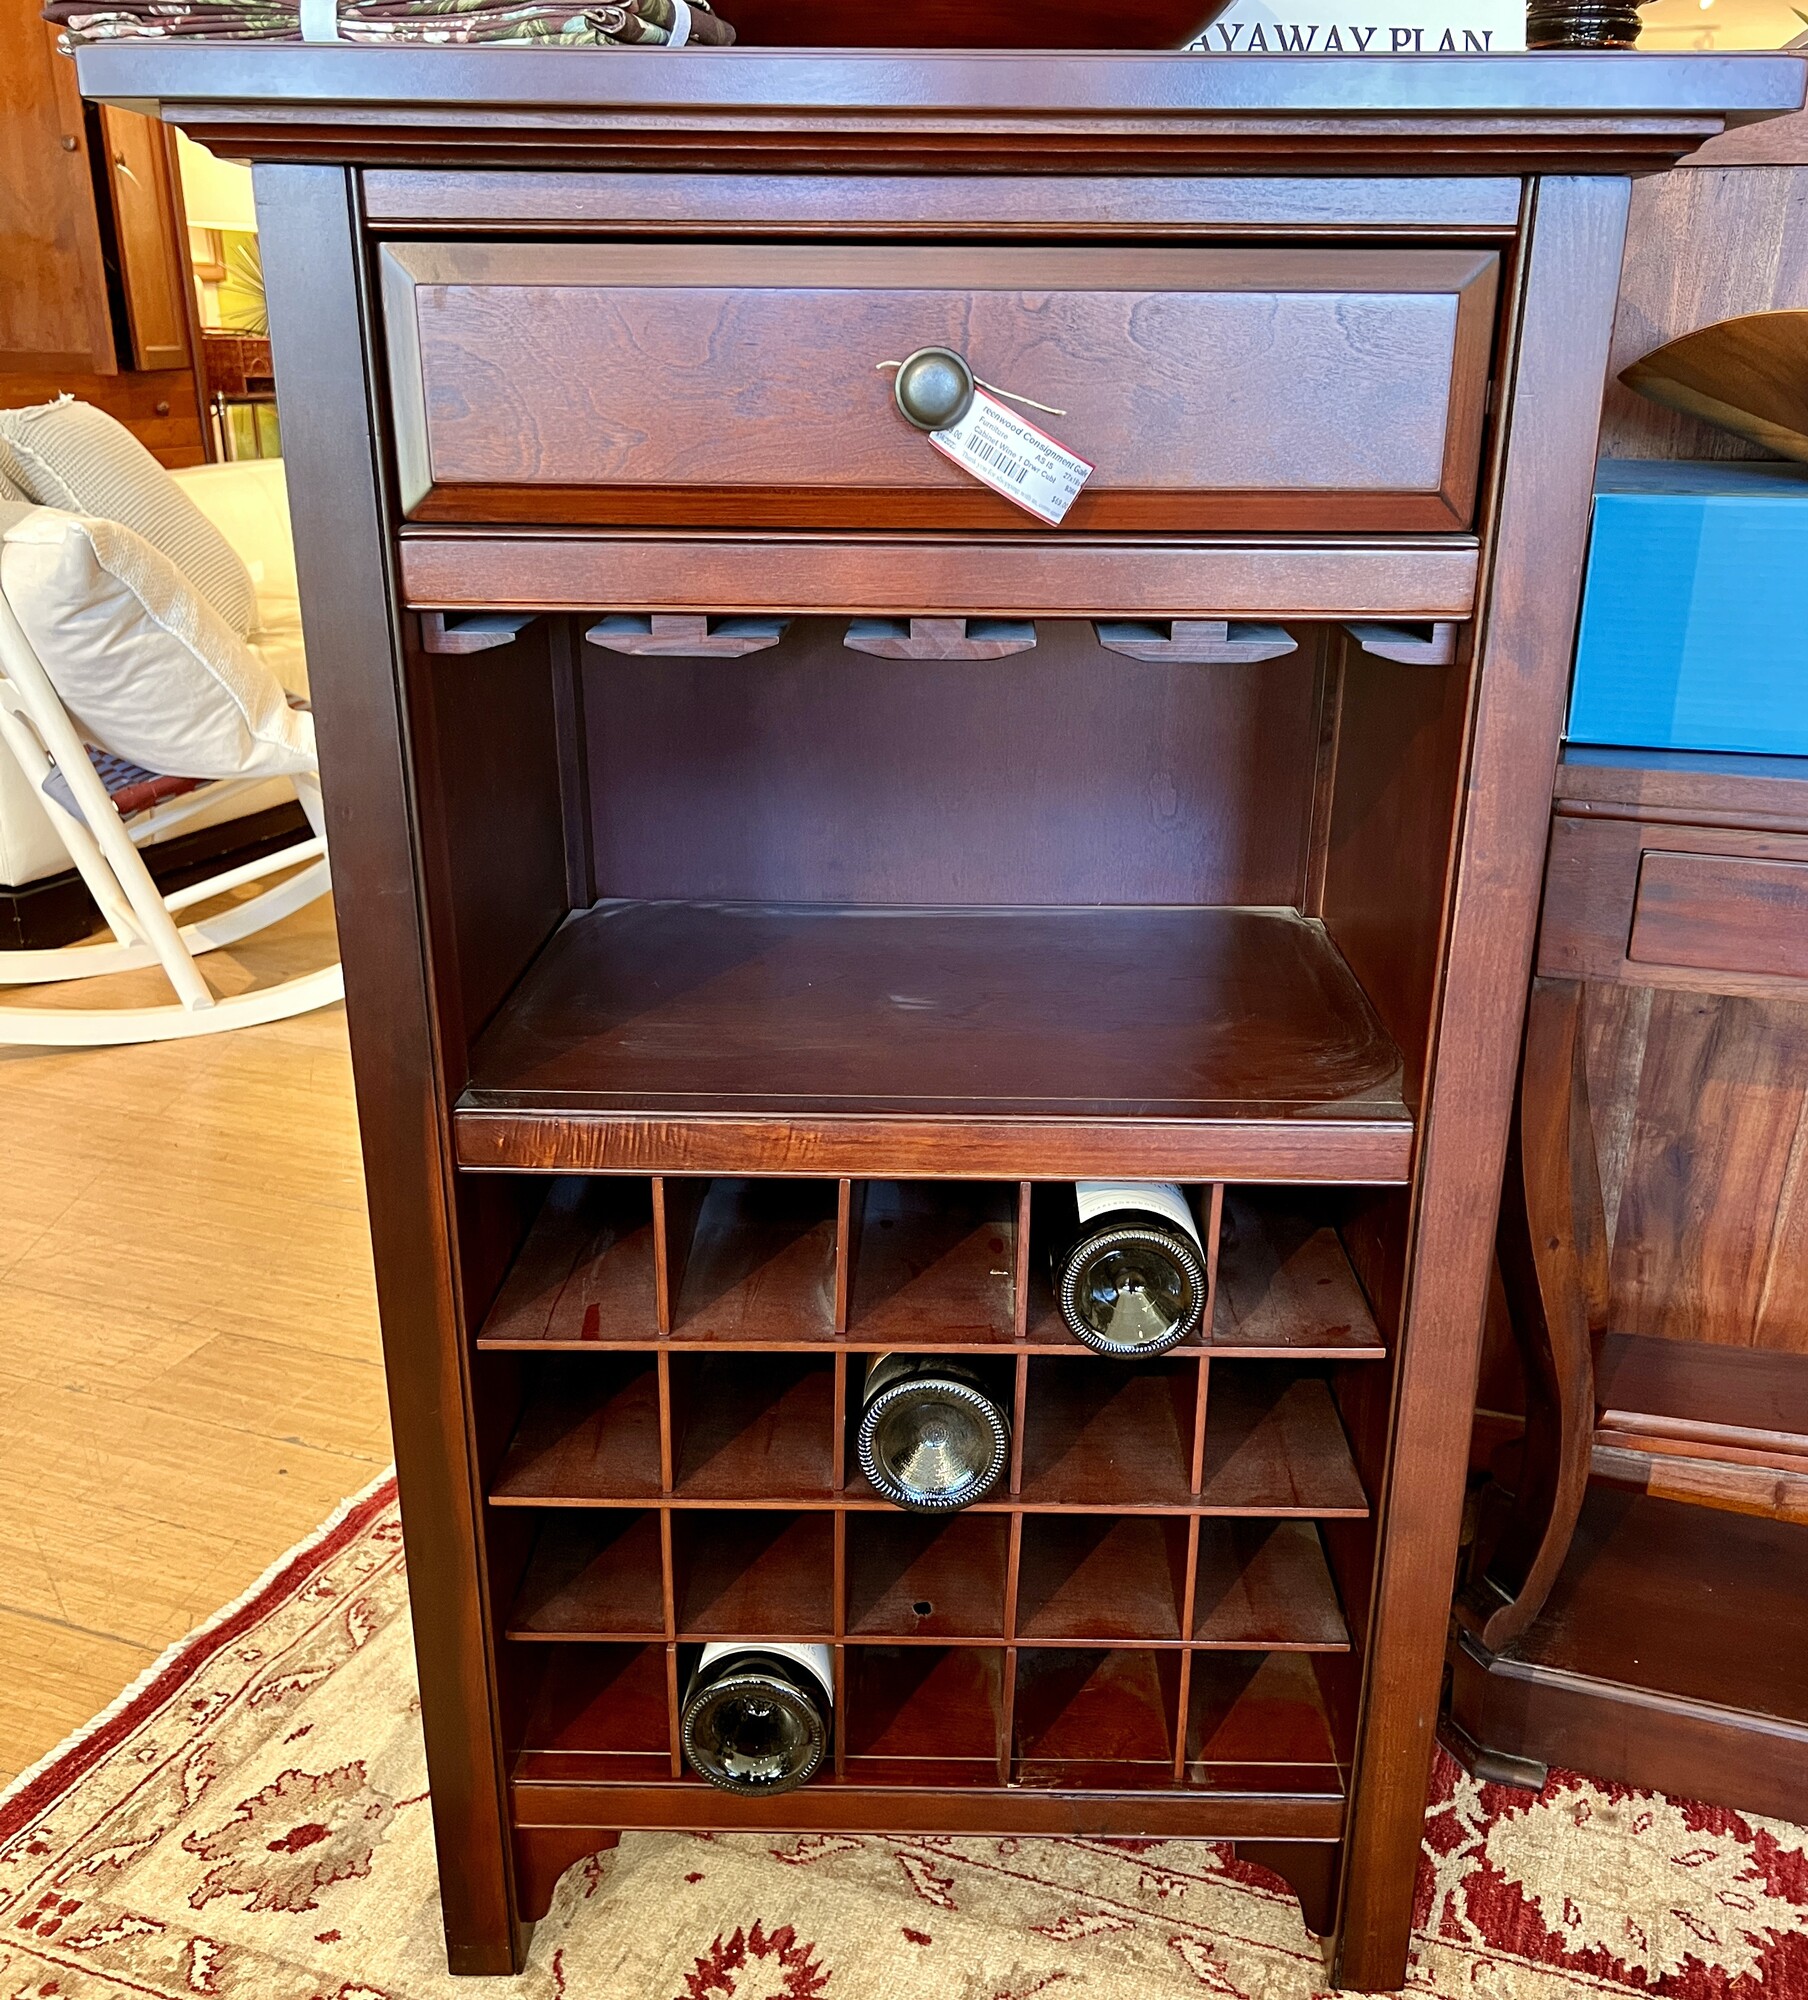 WineCabinet/Cubbies, AS IS,
Size: 27x19x41